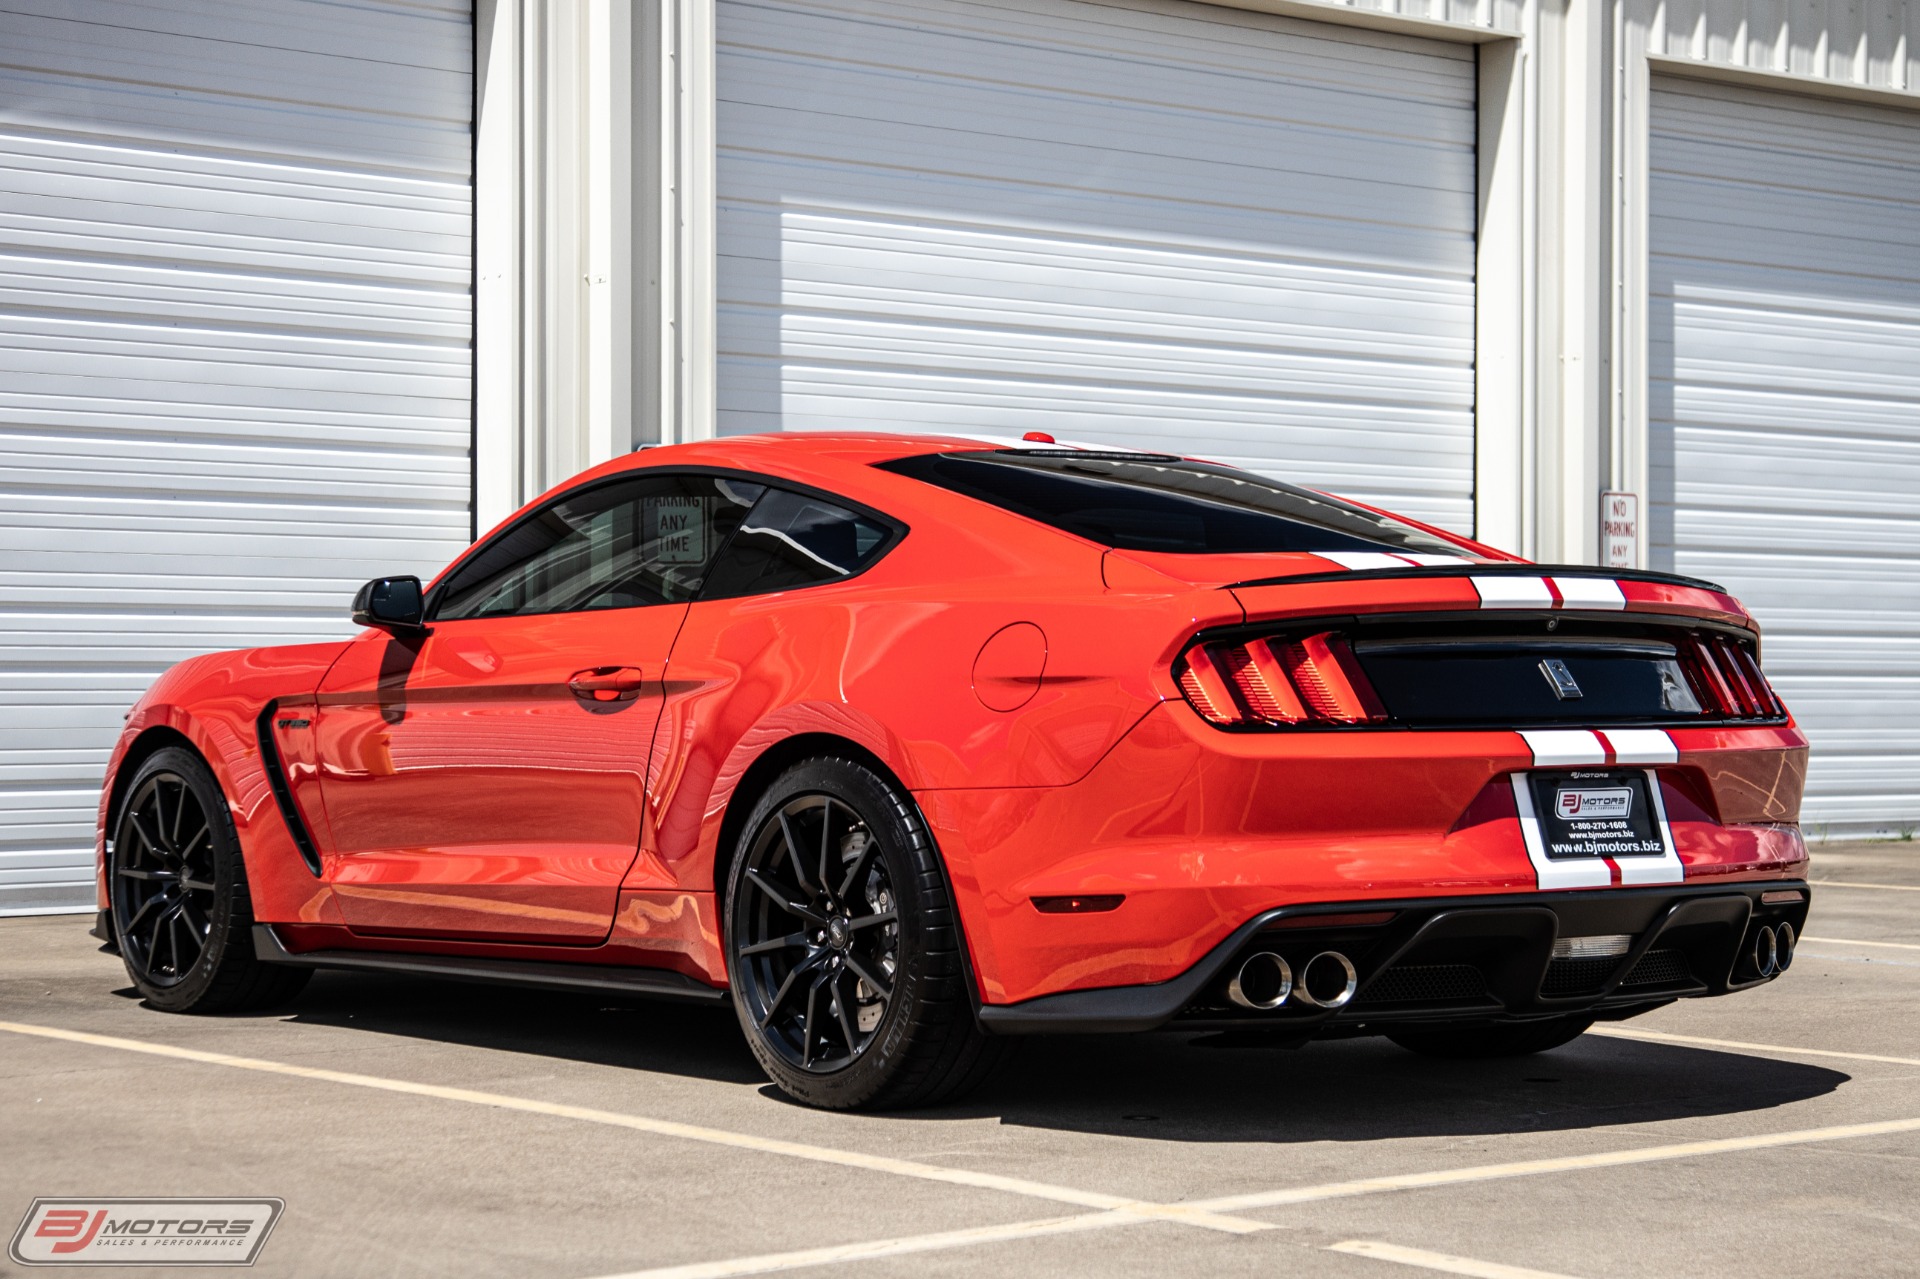 Used-2016-Ford-Mustang-Shelby-GT350.jpg